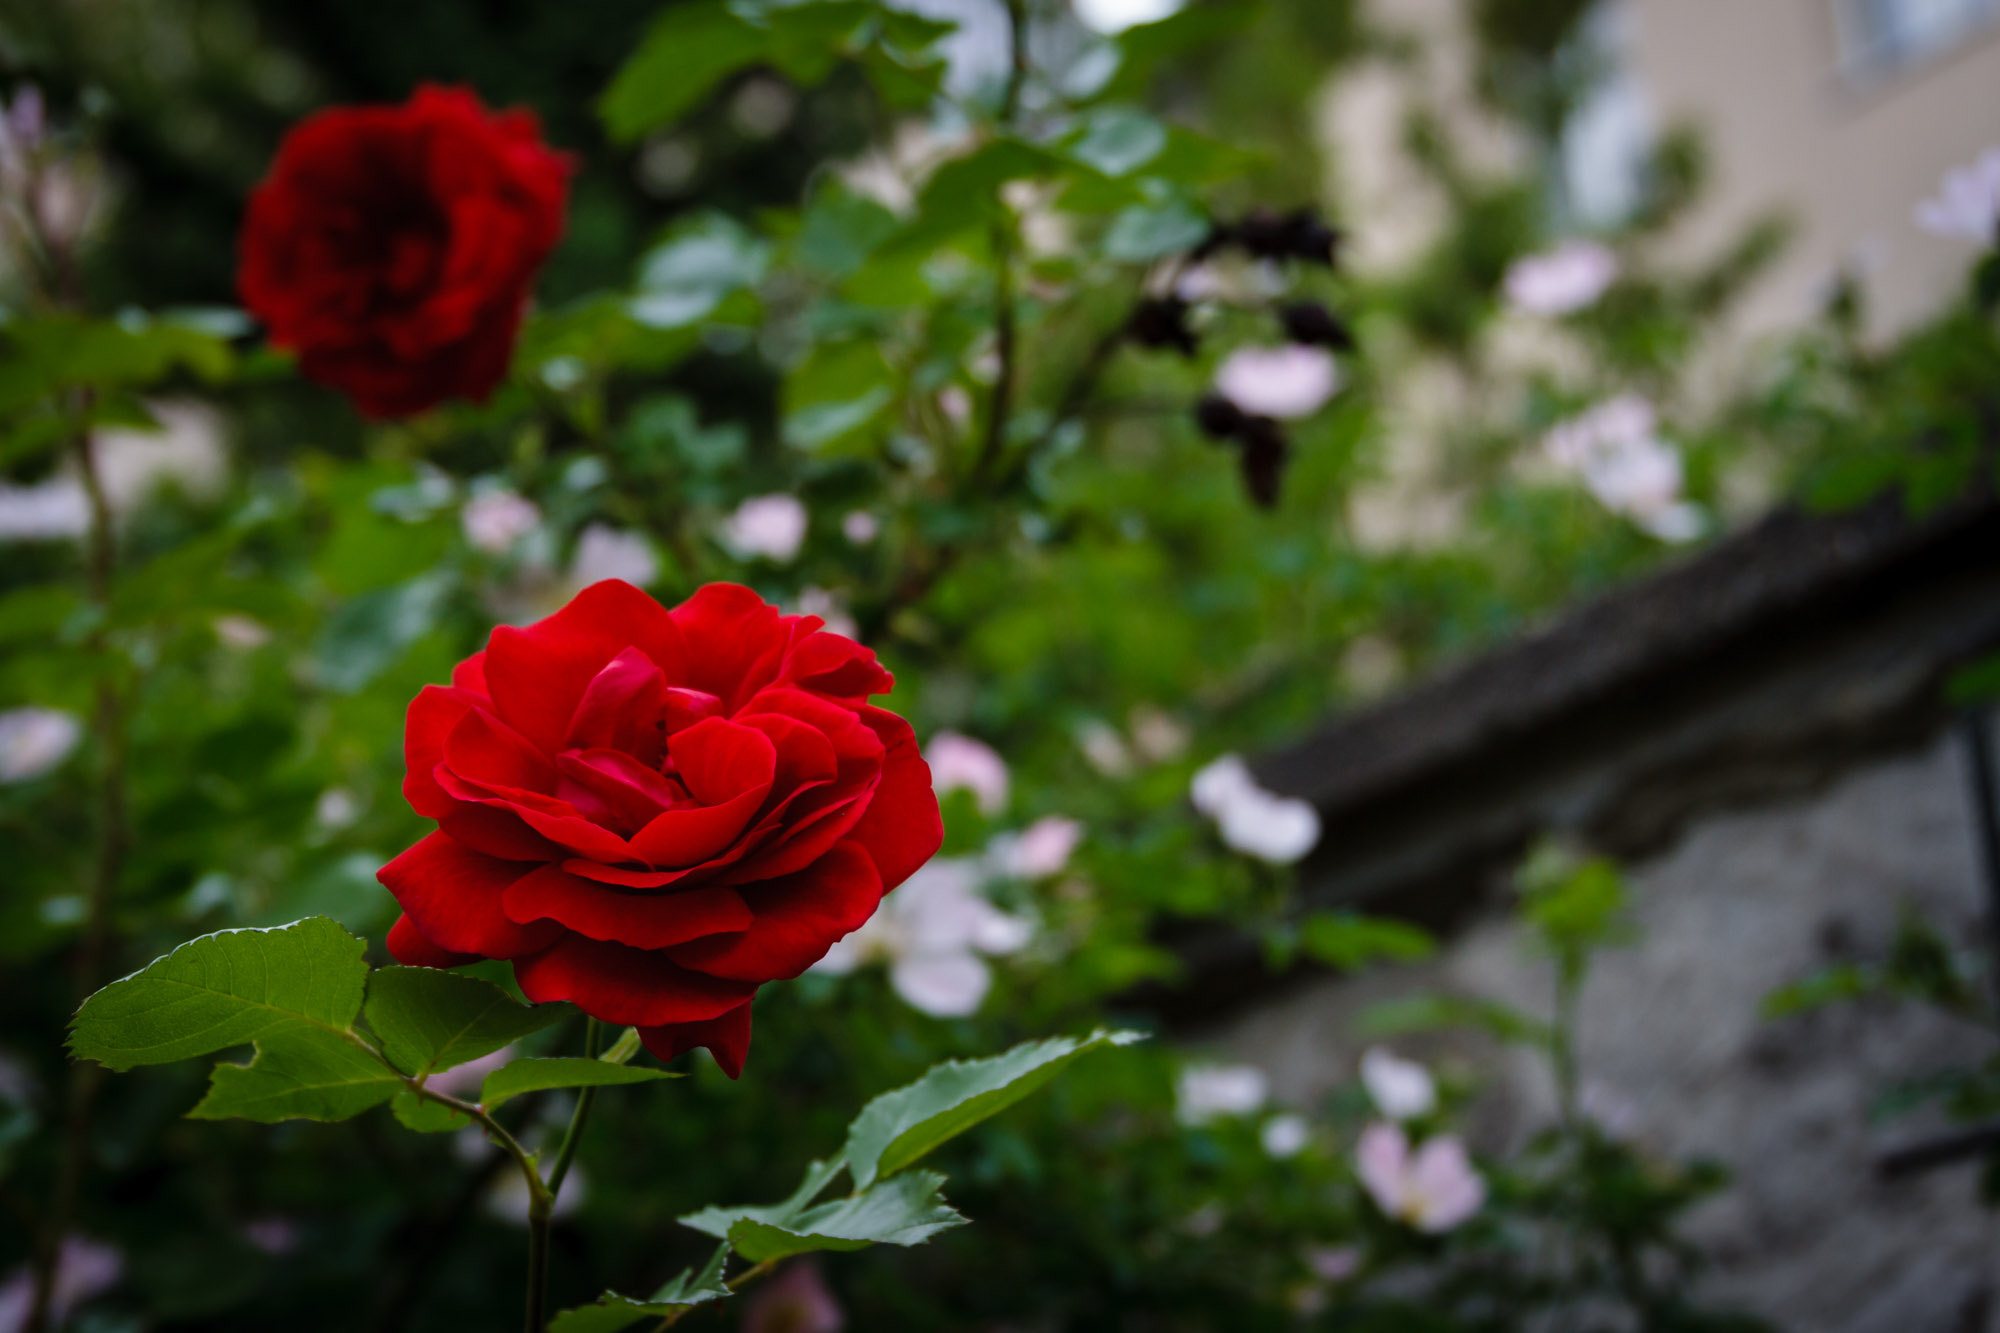 Canon EOS 7D + Sigma 24-105mm f/4 DG OS HSM | A sample photo. Rote rose photography